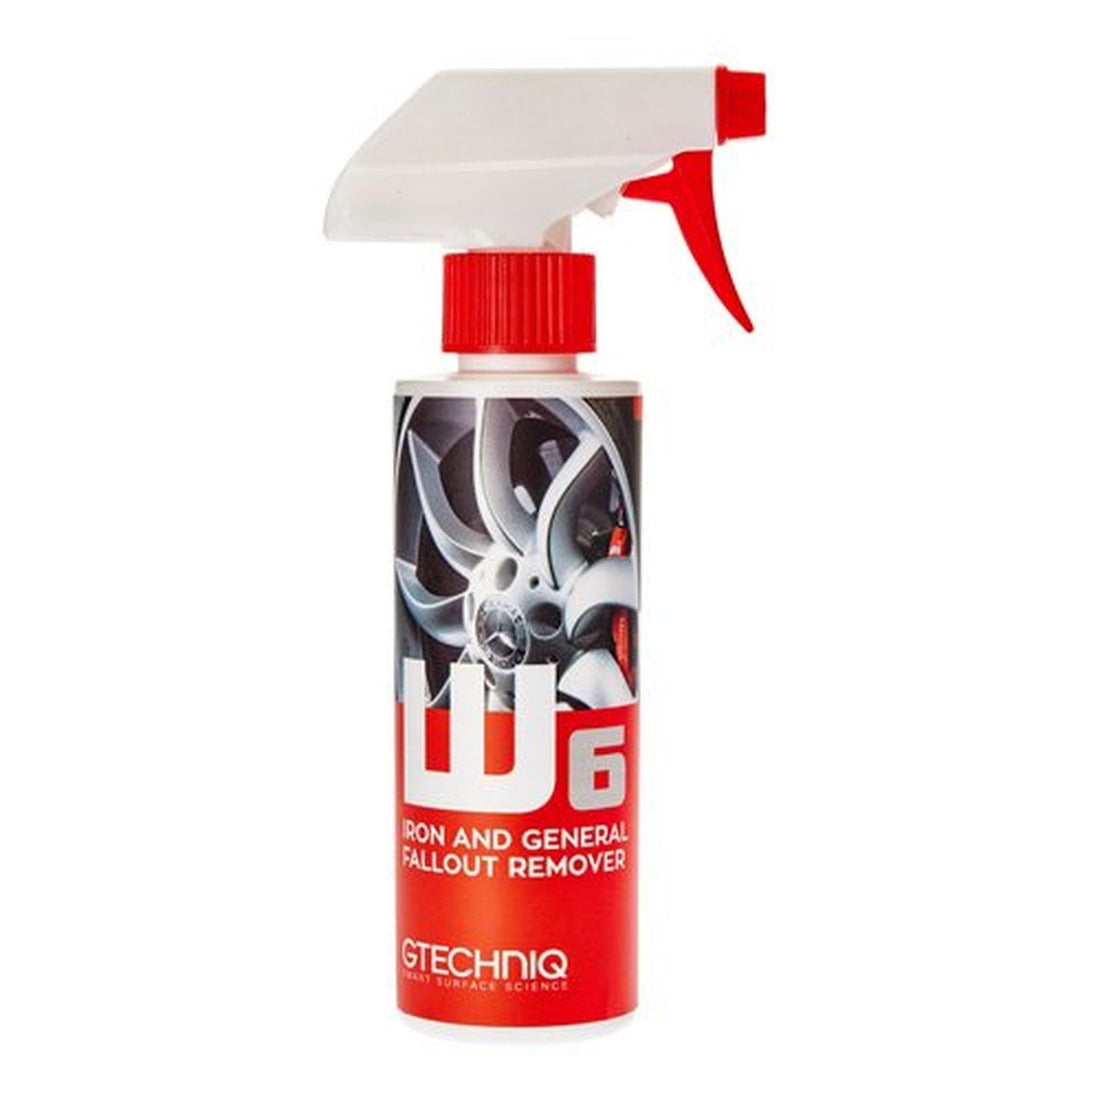 Gtechniq W6 Iron and General Fallout Remover 250ml - Detailing Connect